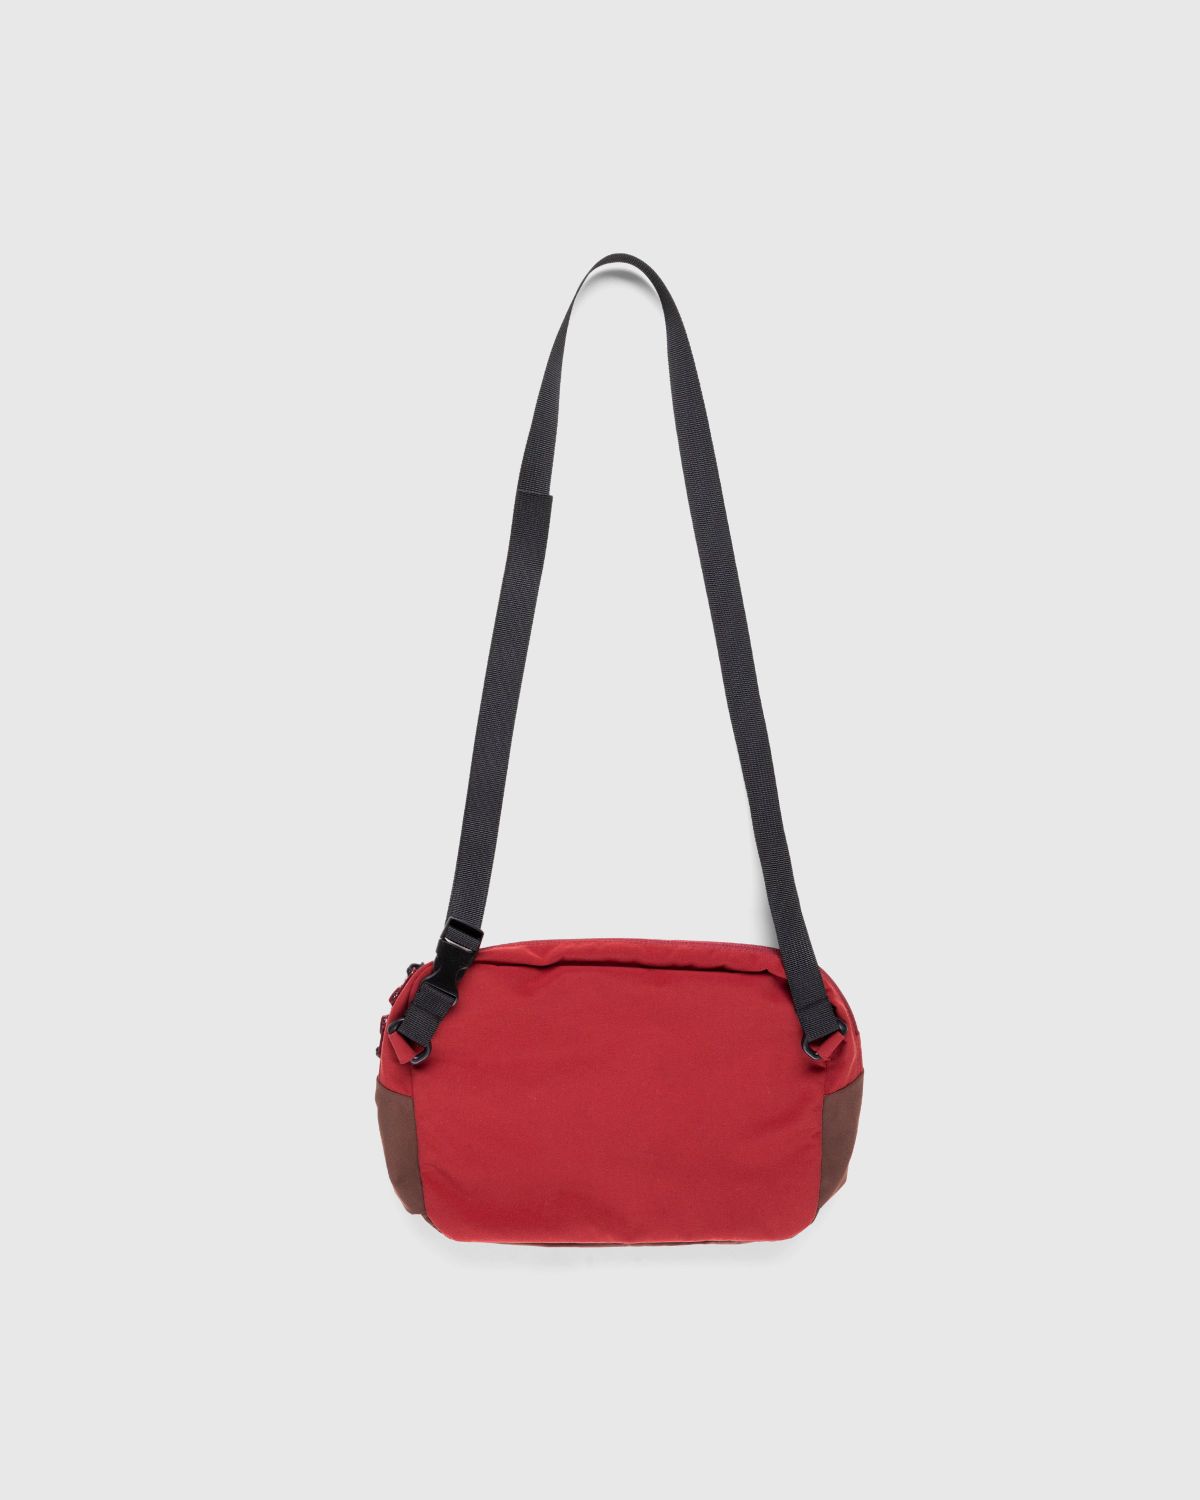 Highsnobiety HS05 – 3 Layer Nylon Side Bag Red - Bags - Red - Image 2